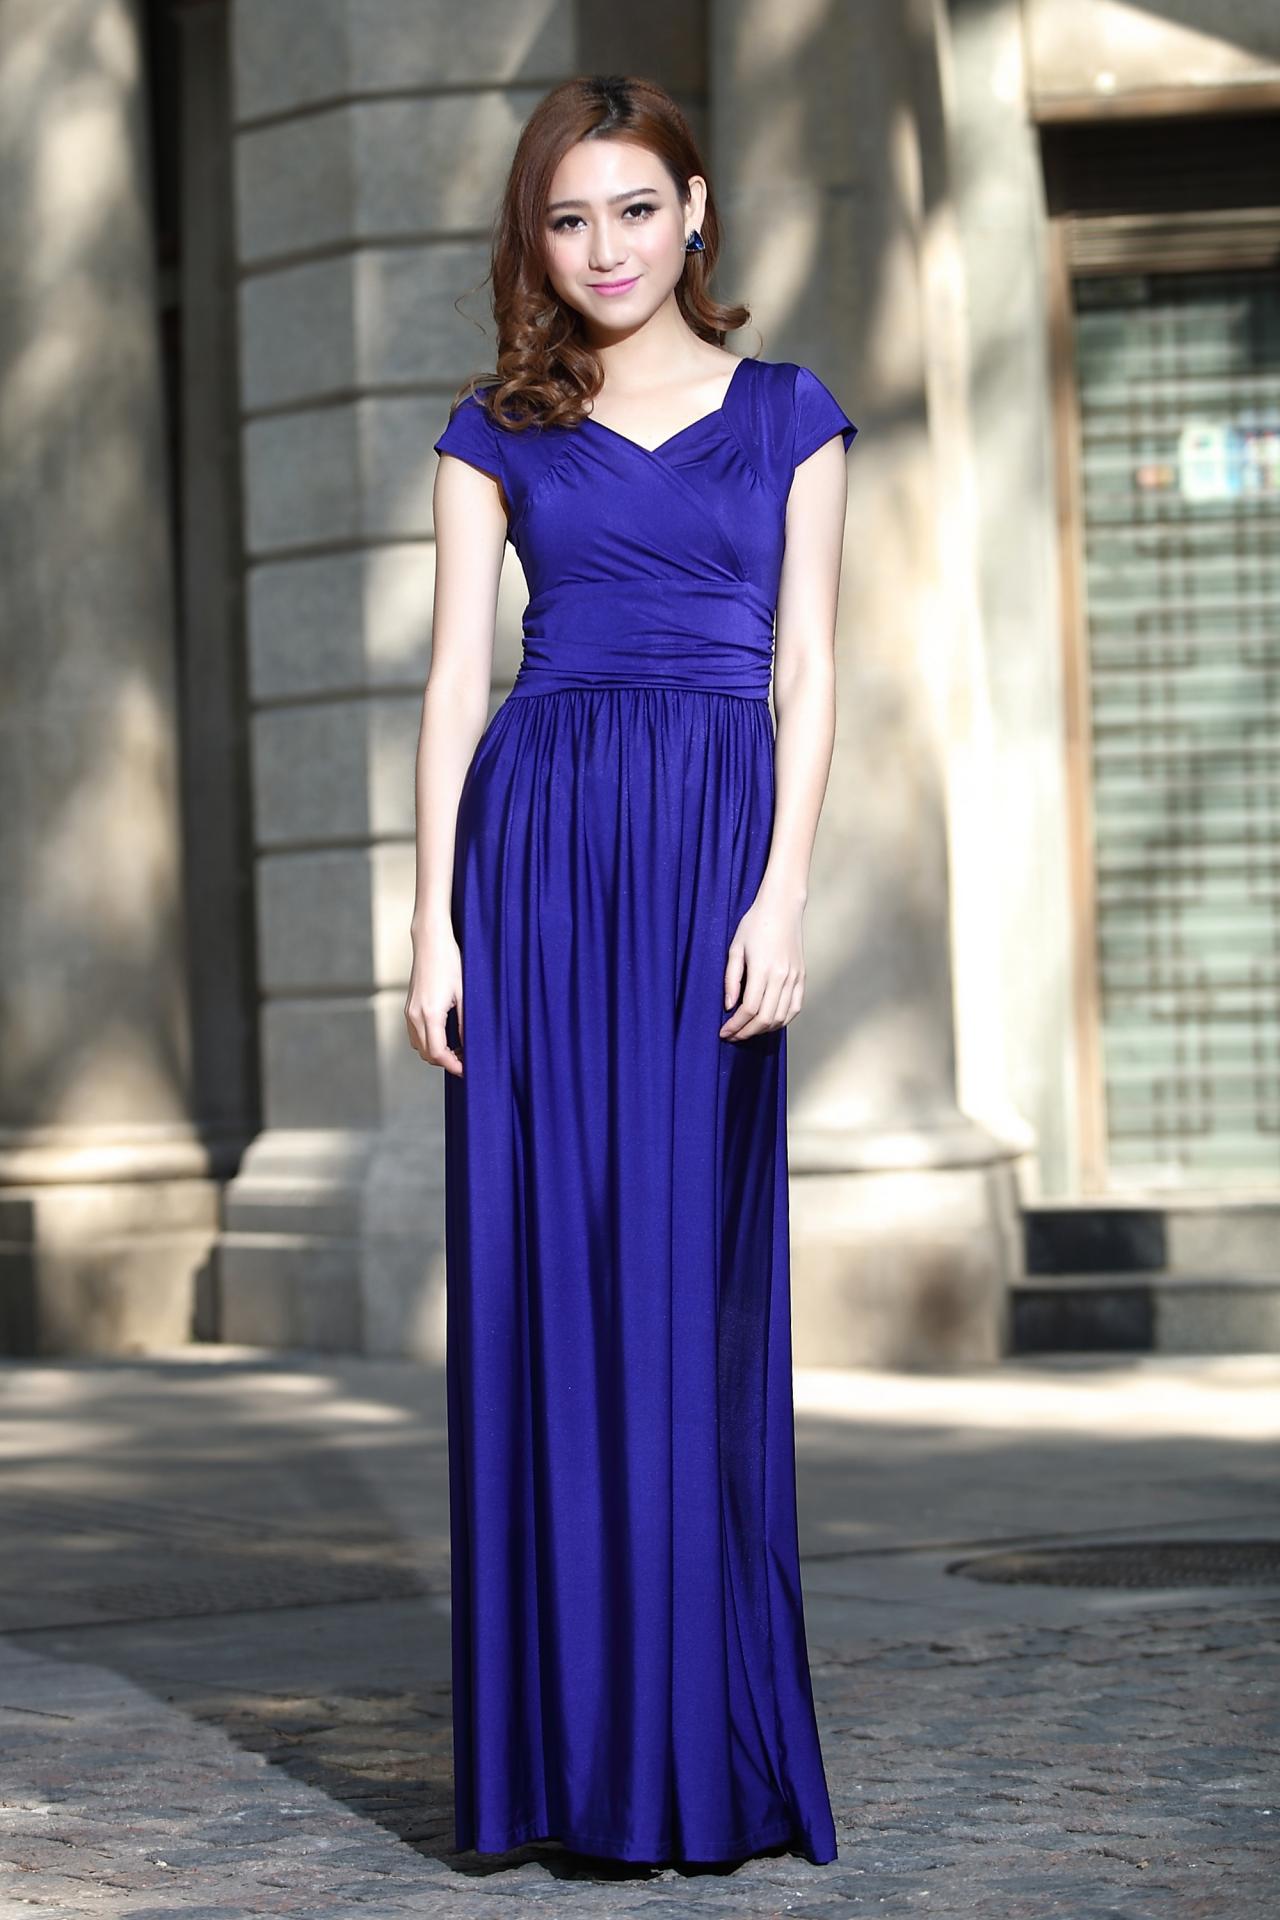 Cap Sleeve Long Formal Prom Dresses Party Bridesmaid Evening Gowns Royal Blue